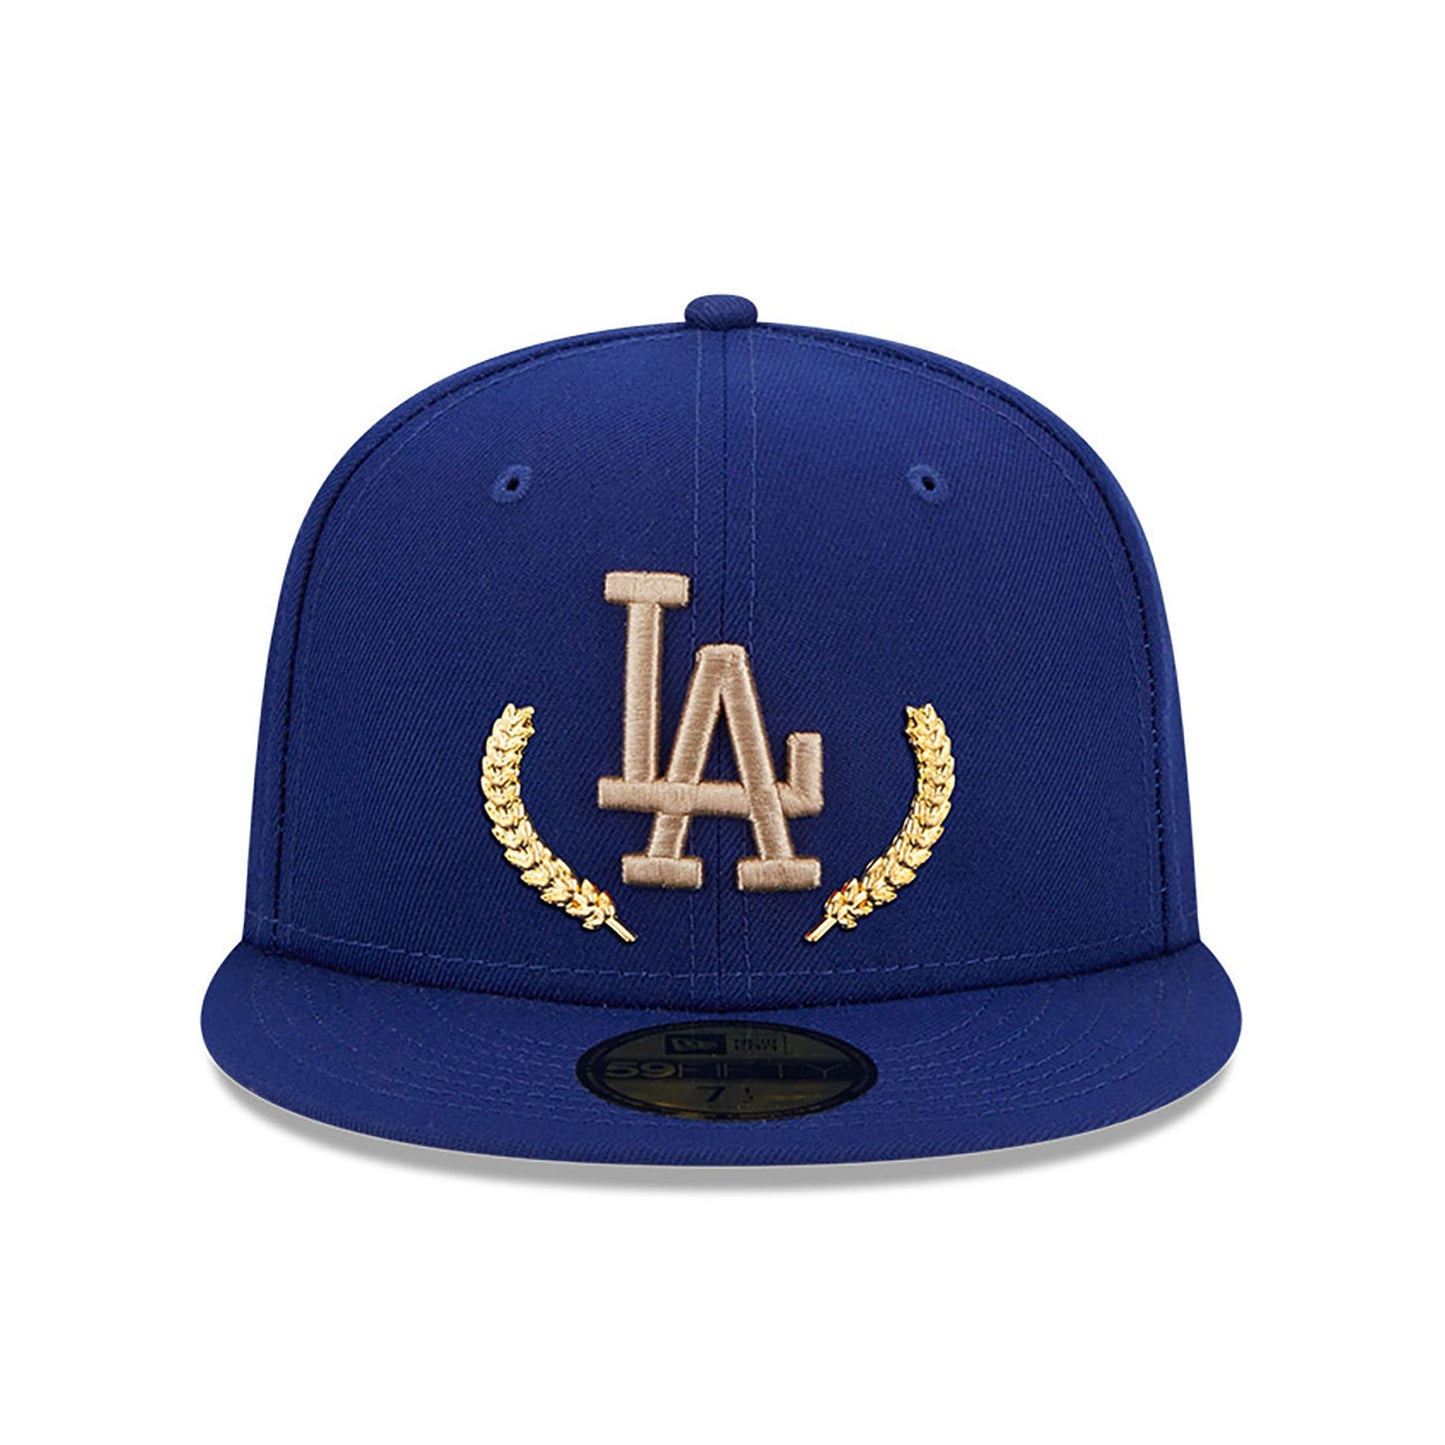 LA Lakers gold leaf fitted cap